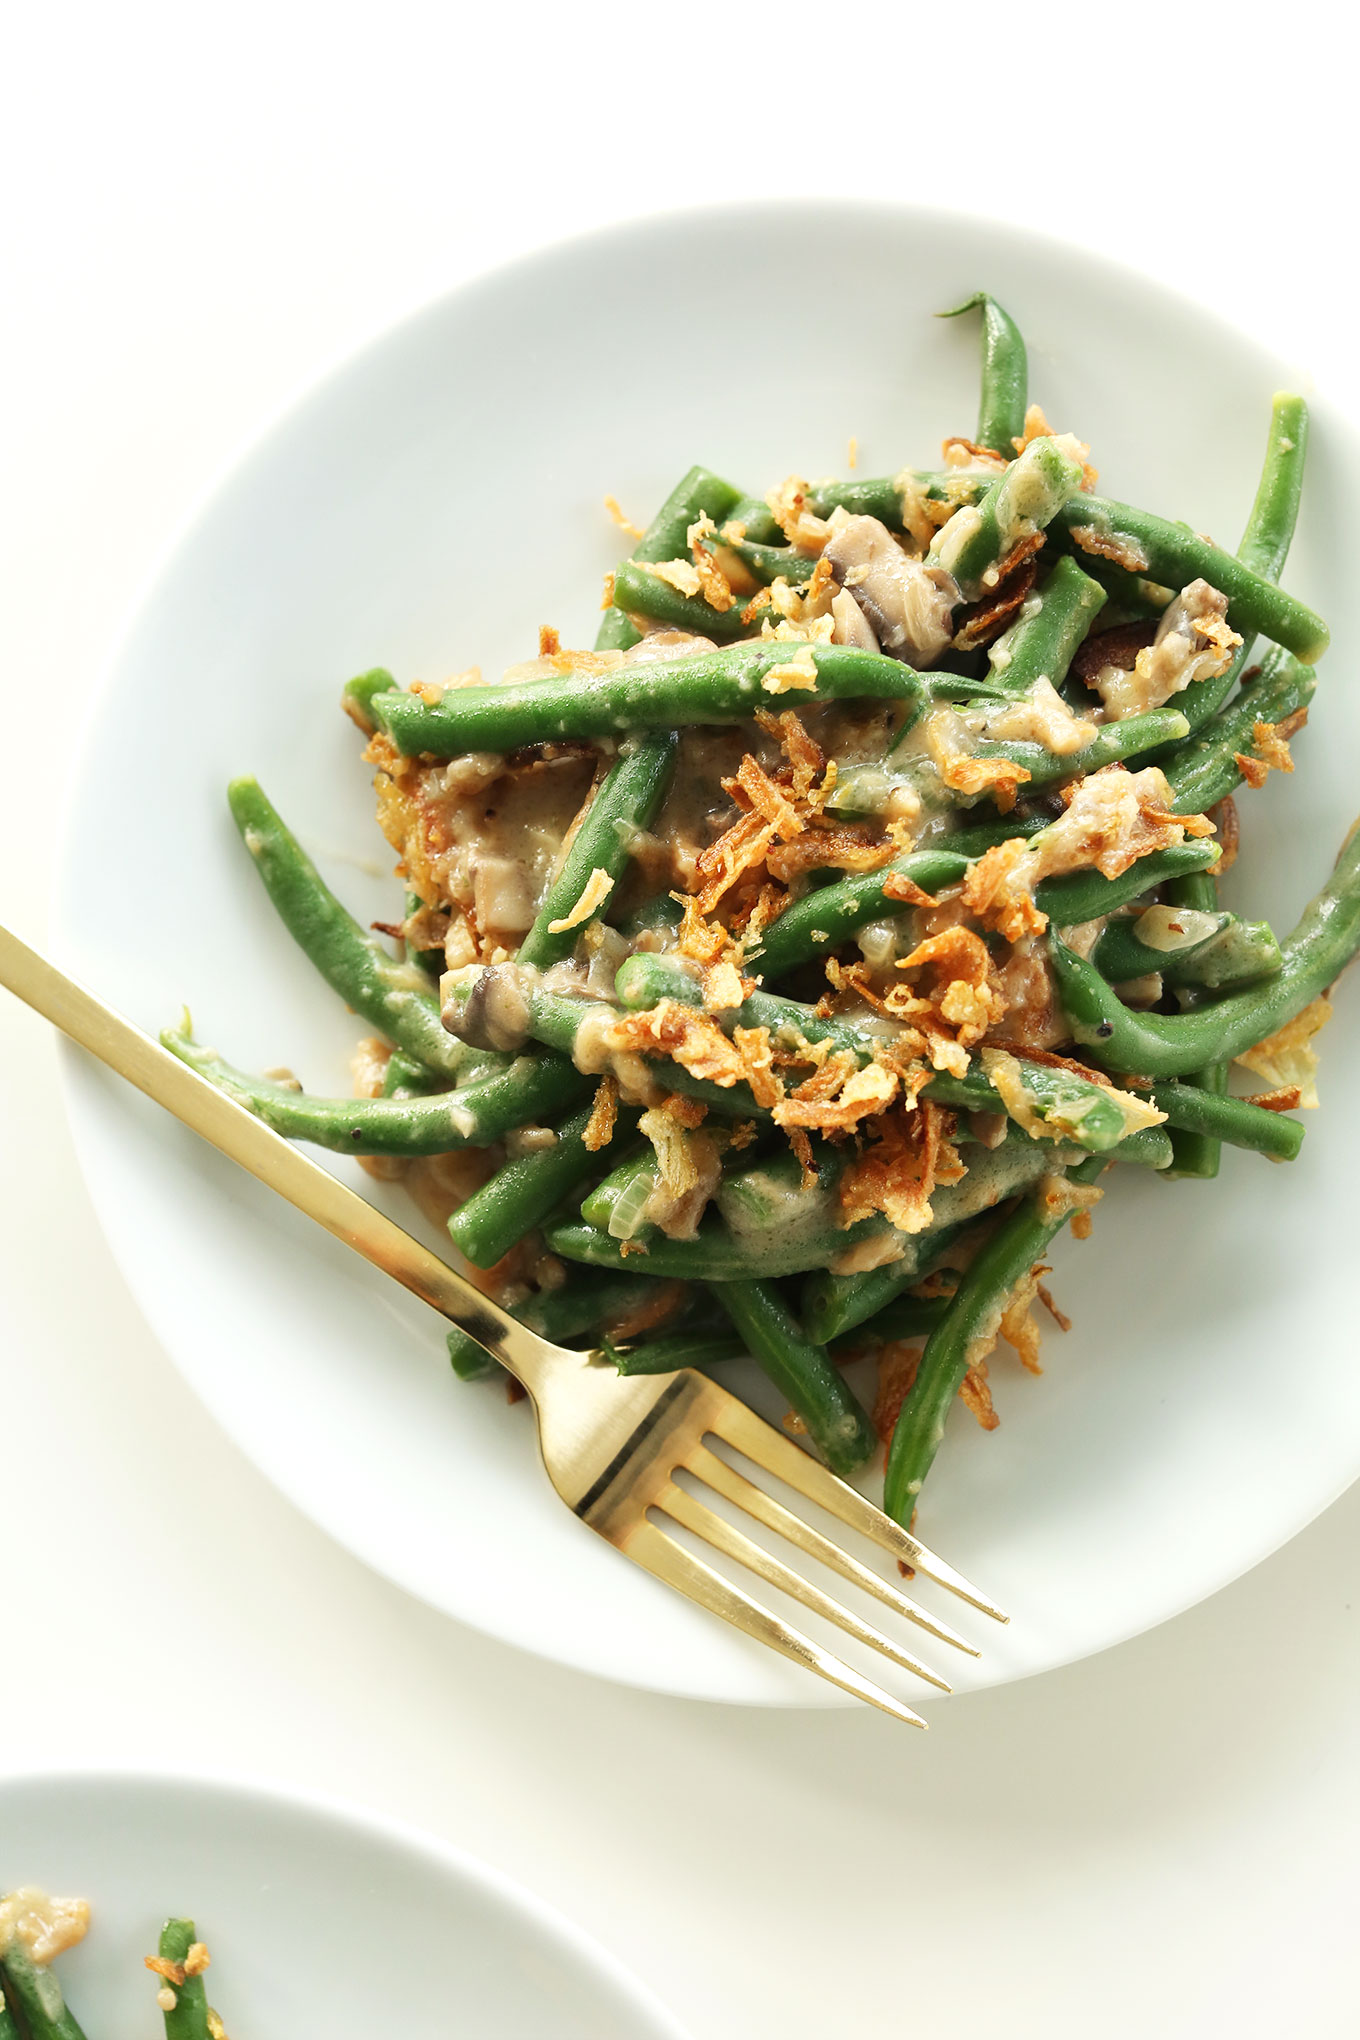 Plate of the Easiest Green Bean Casserole recipe